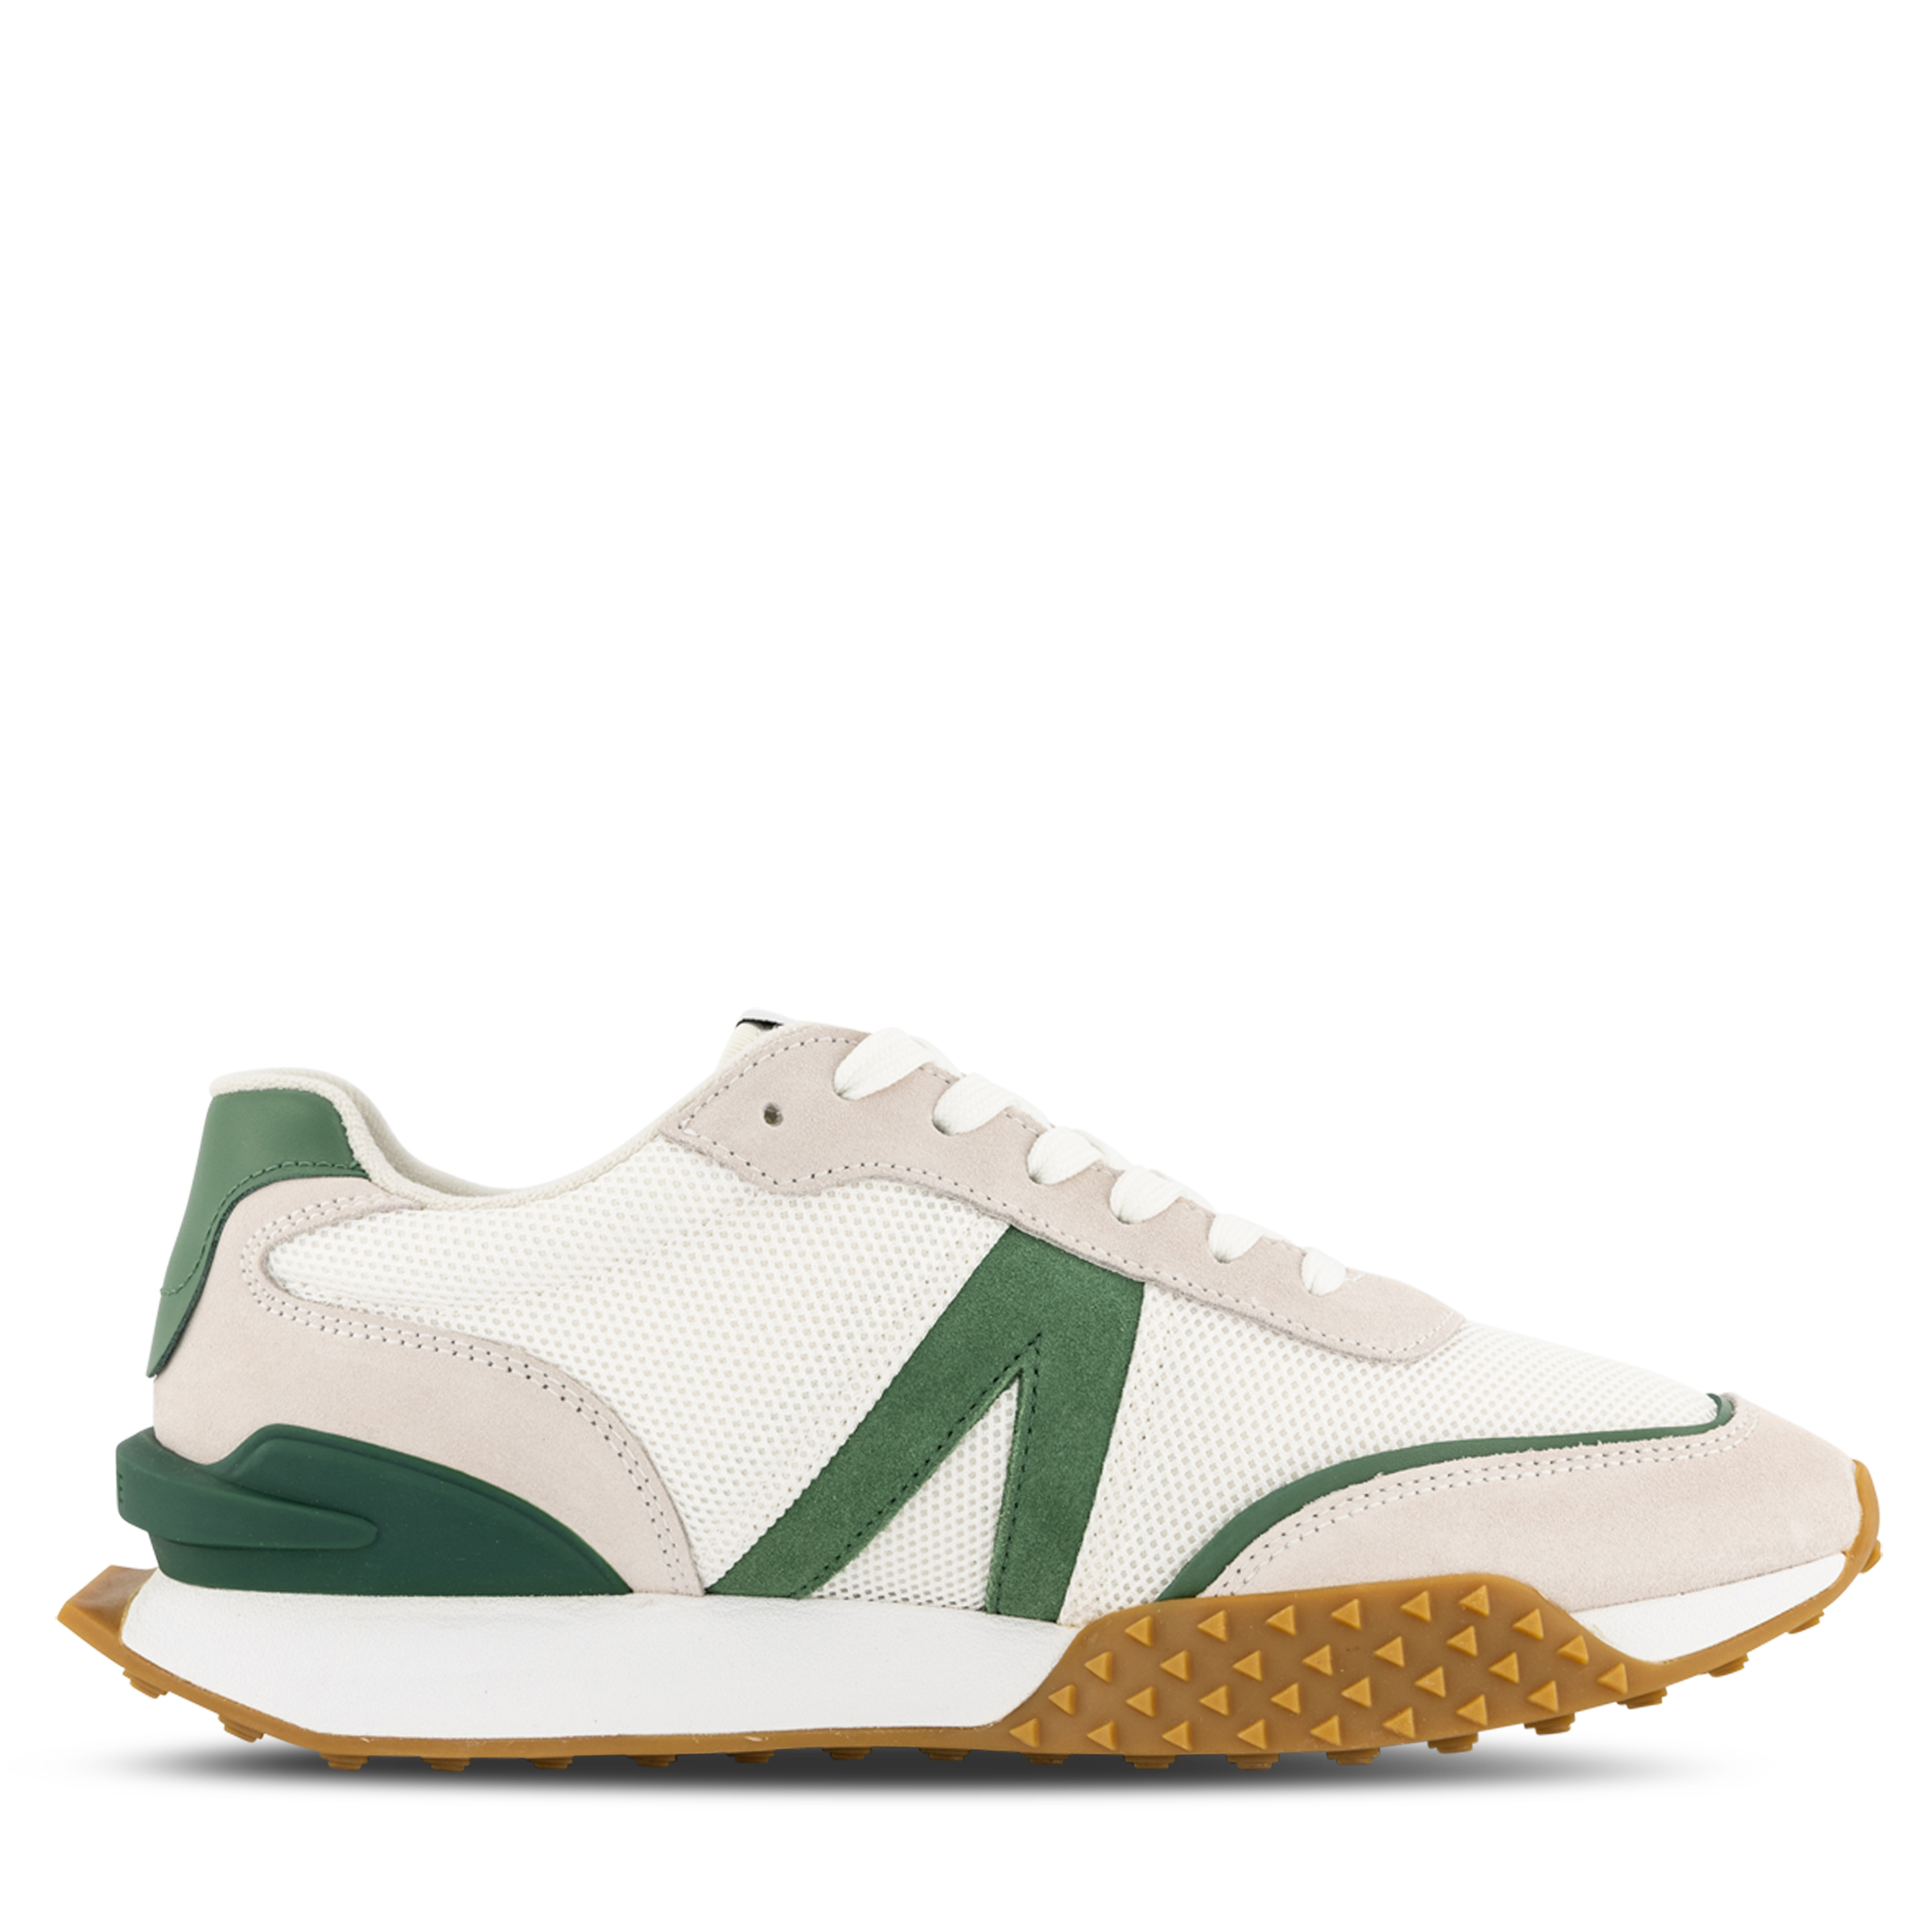 Lacoste L-SPIN DELUXE 123 Wht/Grn | Hype DC